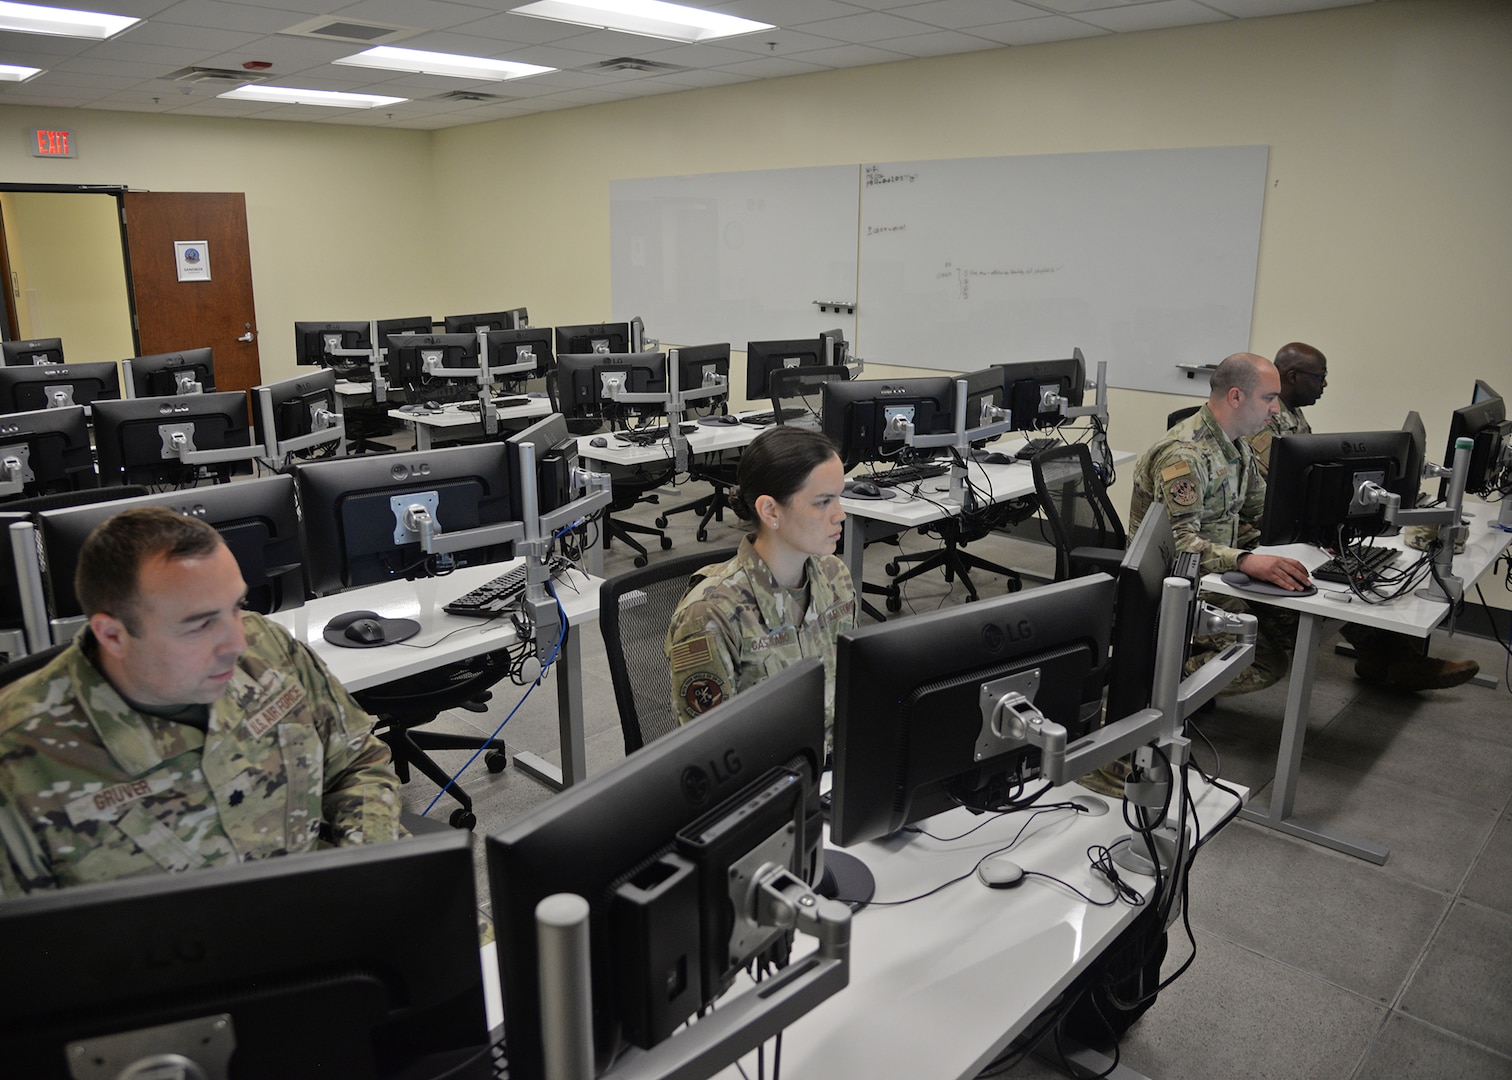 Airmen assigned to the 175th Cyberspace Operations Group work at computer terminals at Martin State Air National Guard Base, Middle River, Maryland, June 20, 2023. The Airmen are assisting with Project Vormsi, collaborating with their Estonian partners to build an information-sharing platform.